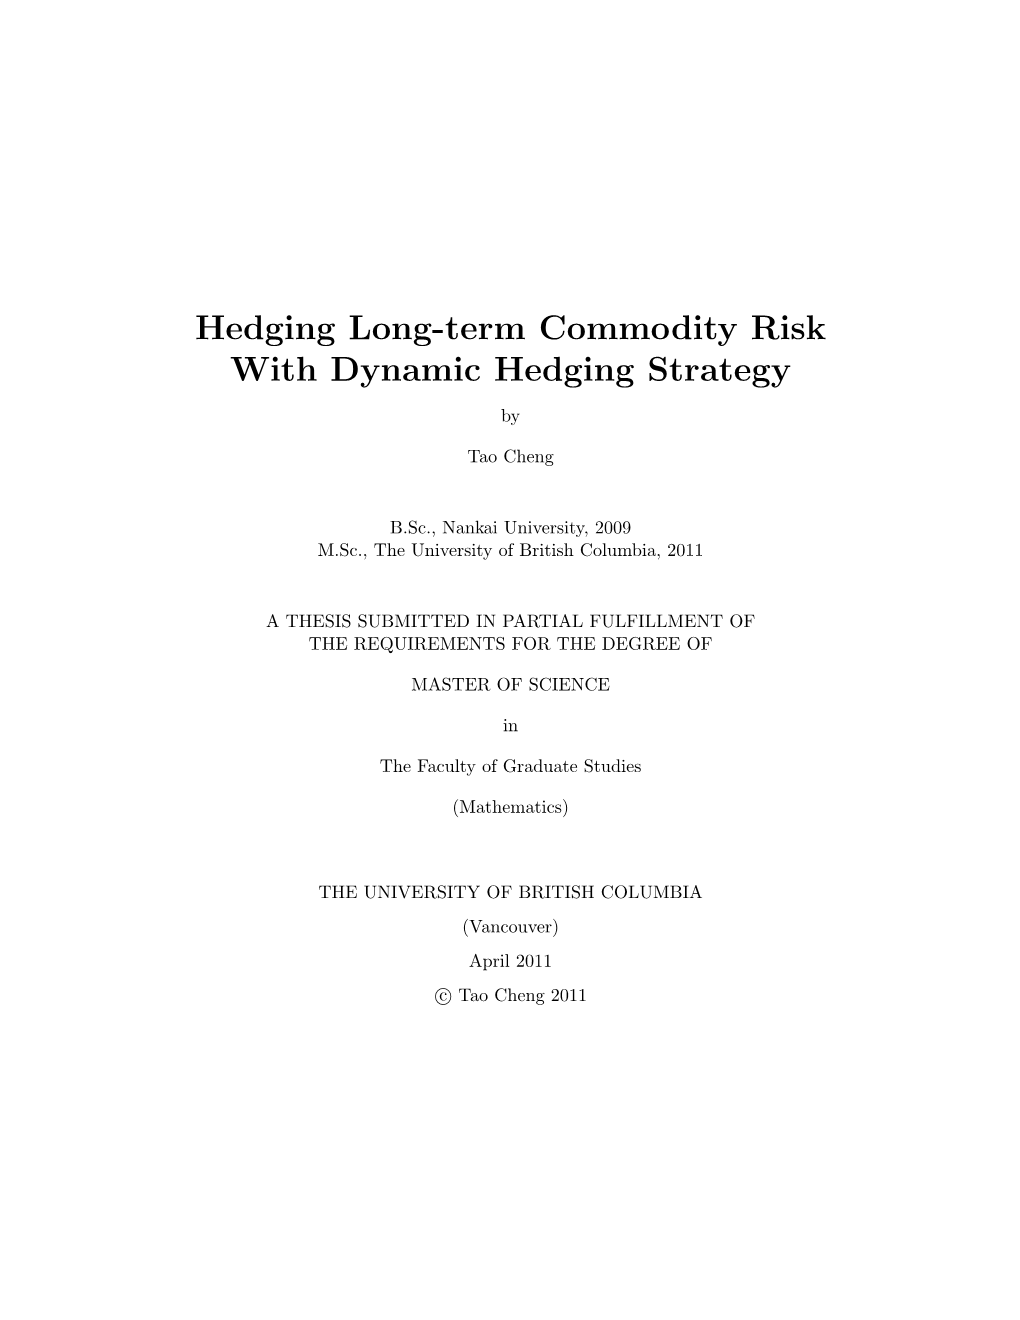 Hedging Long-Term Commodity Risk with Dynamic Hedging Strategy